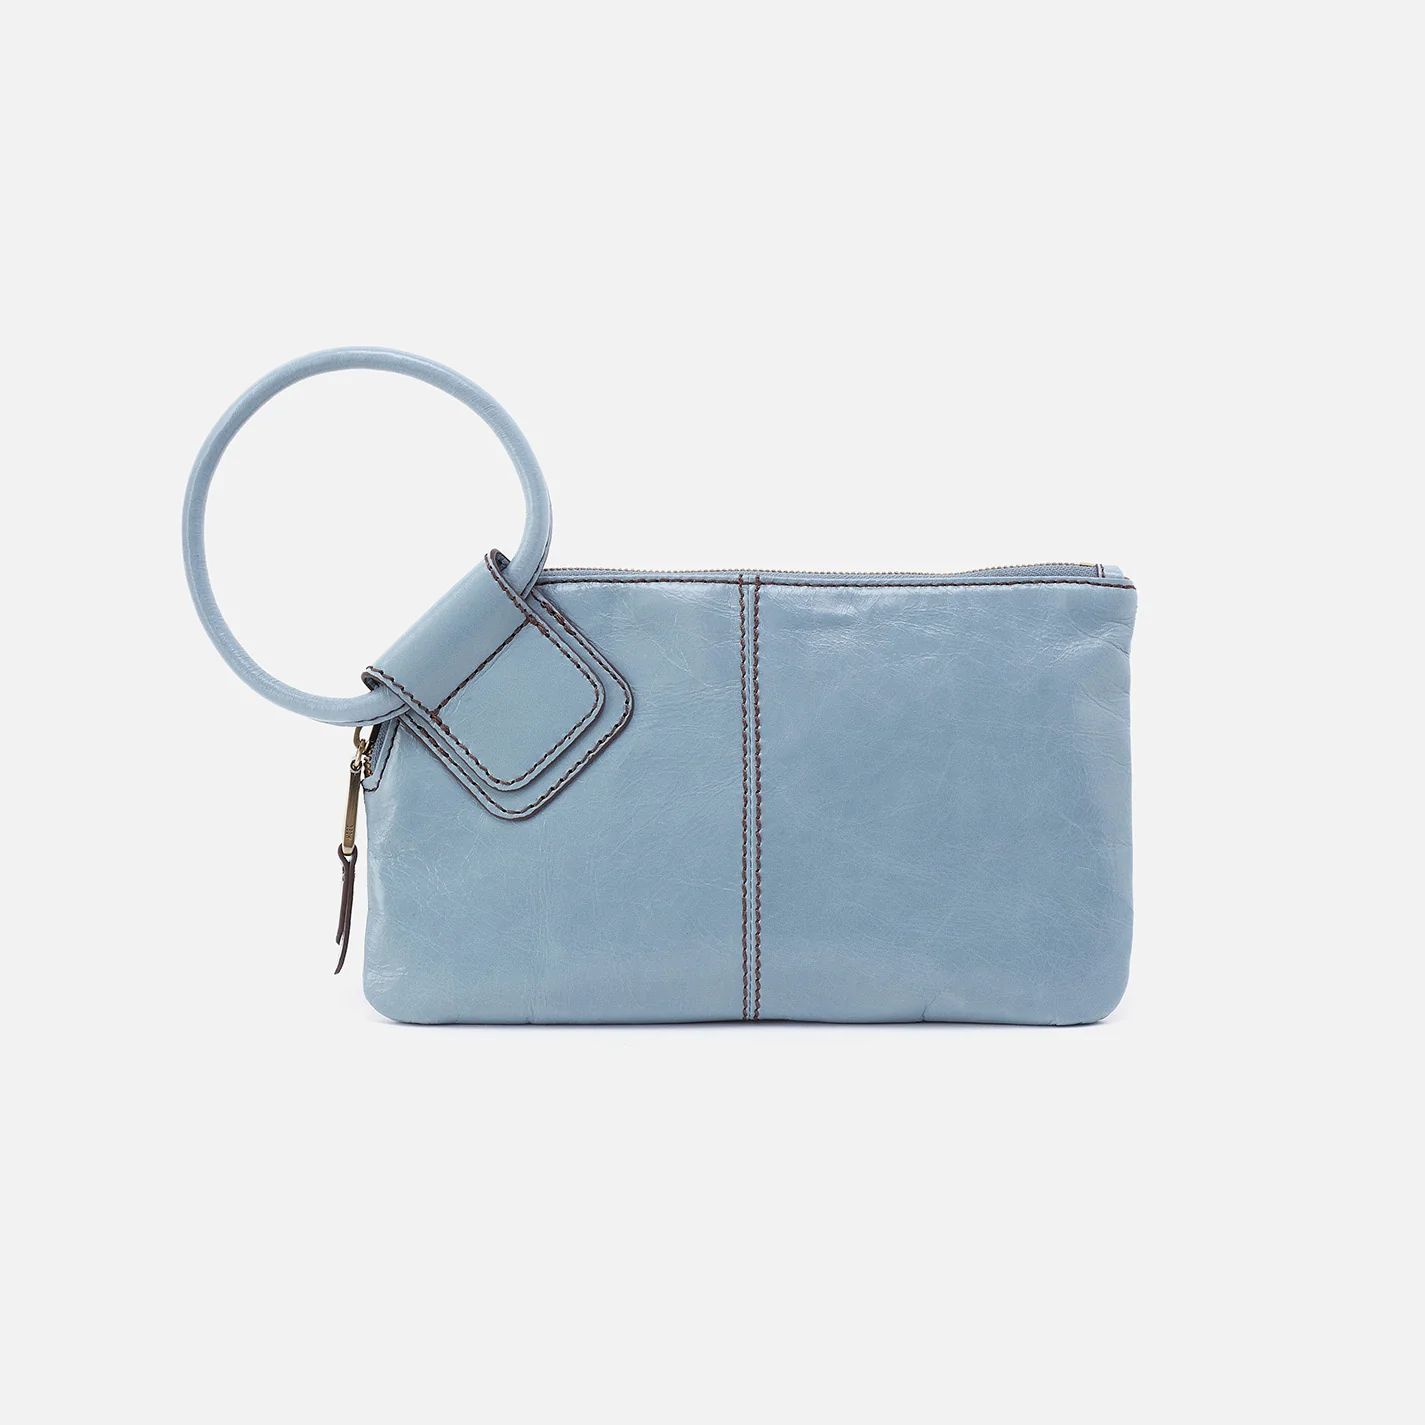 Sable Wristlet in Polished Leather - Natural | HOBO Bags